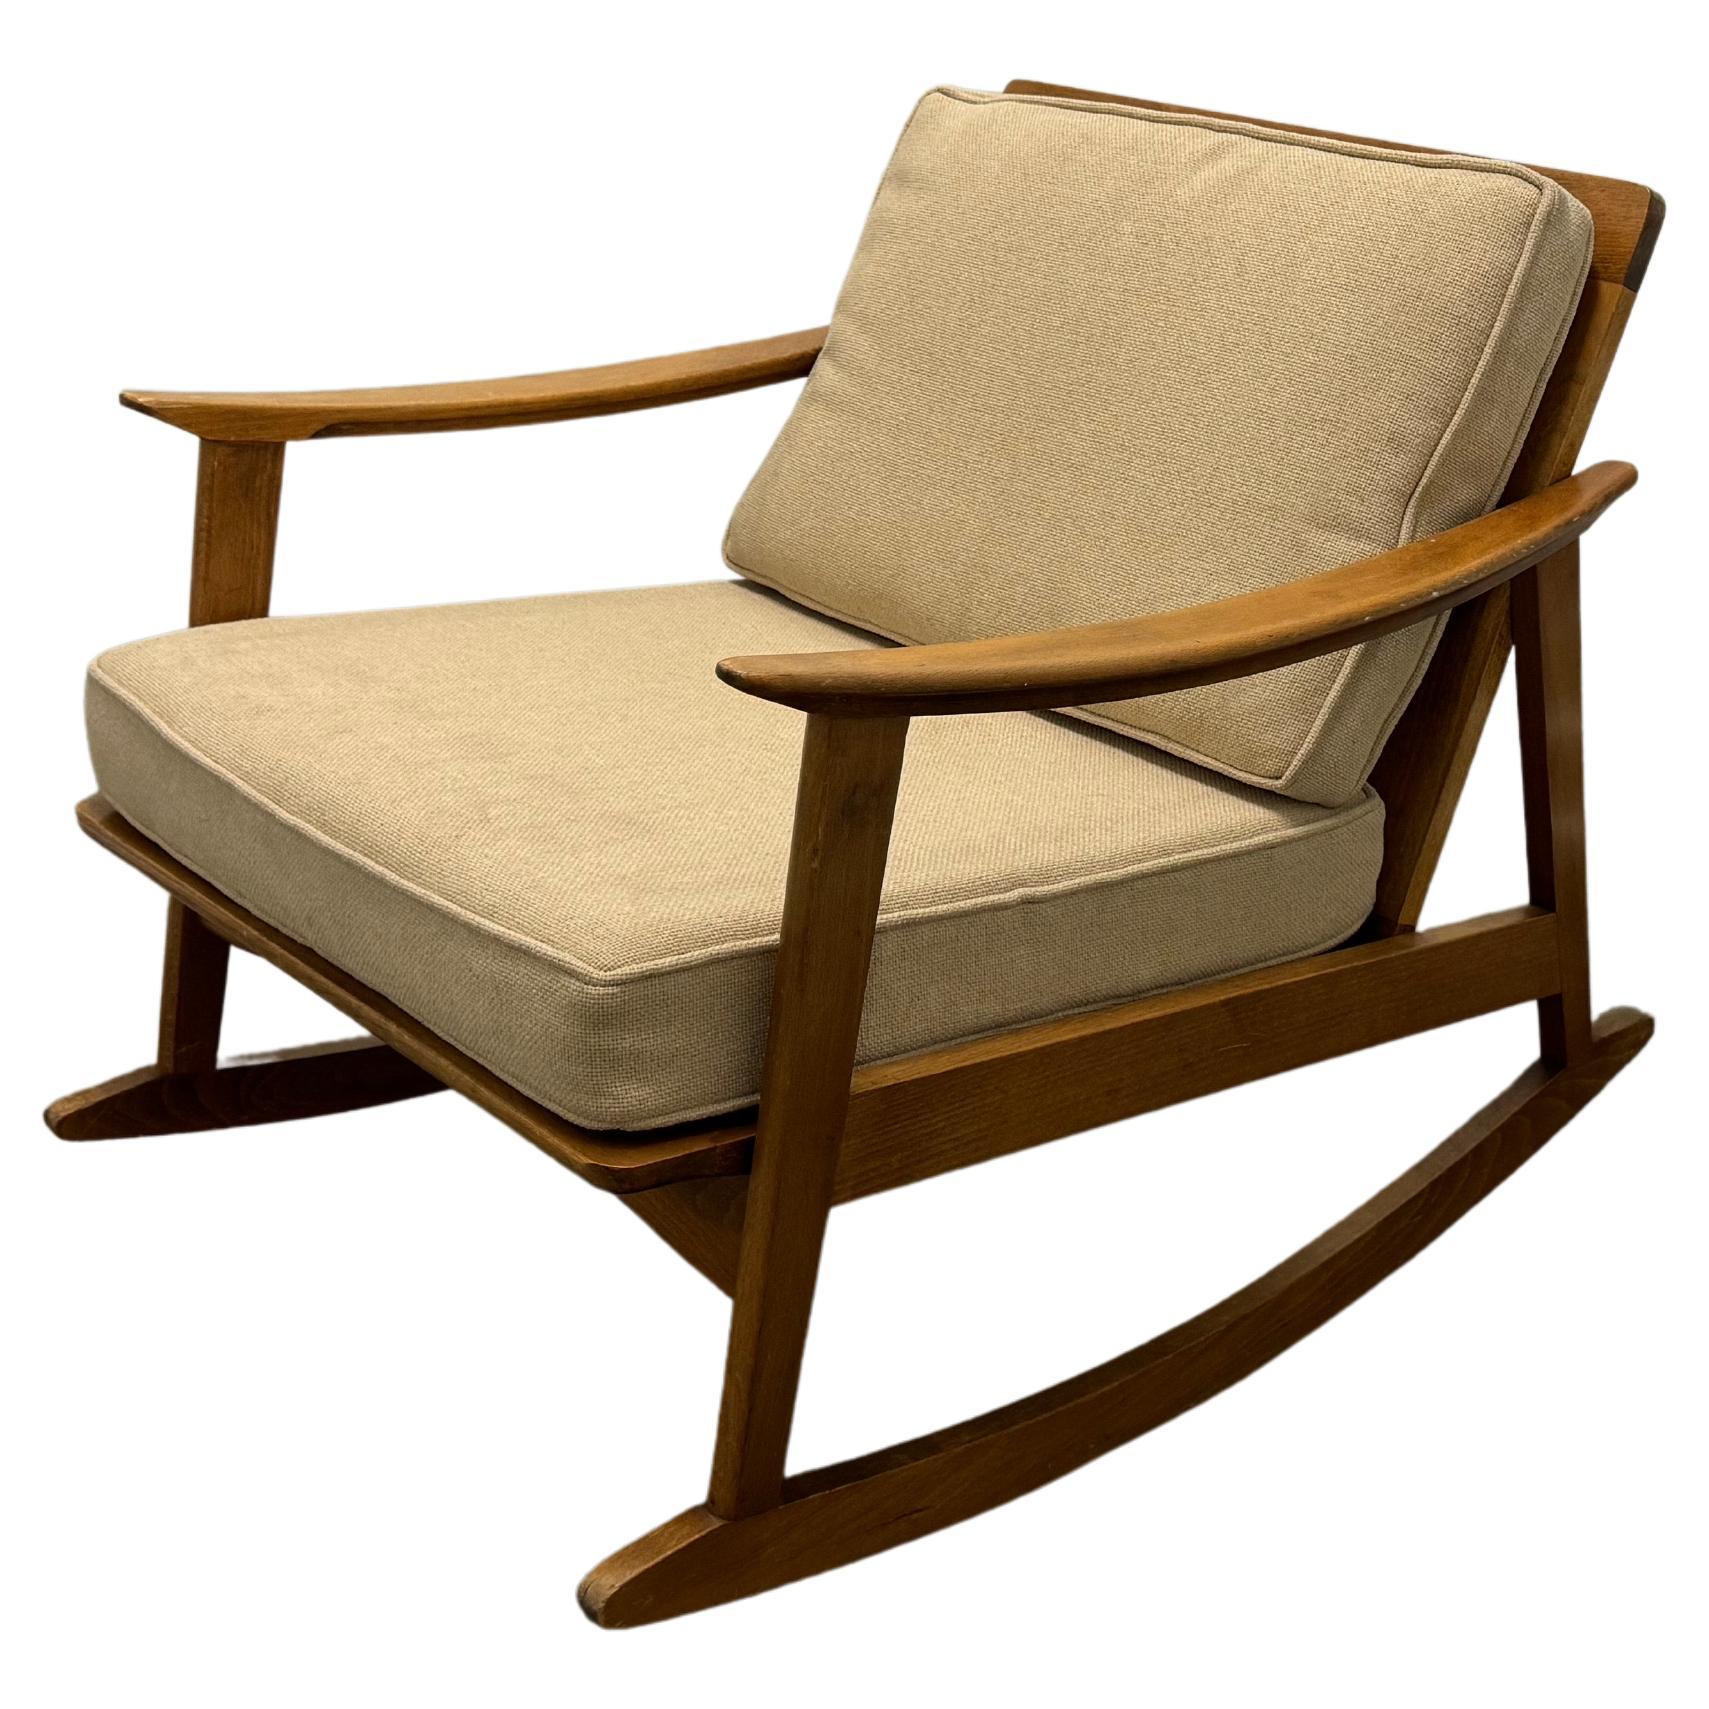 1960's Mid Century Modern Danish Style Rocking Arm Chair For Sale